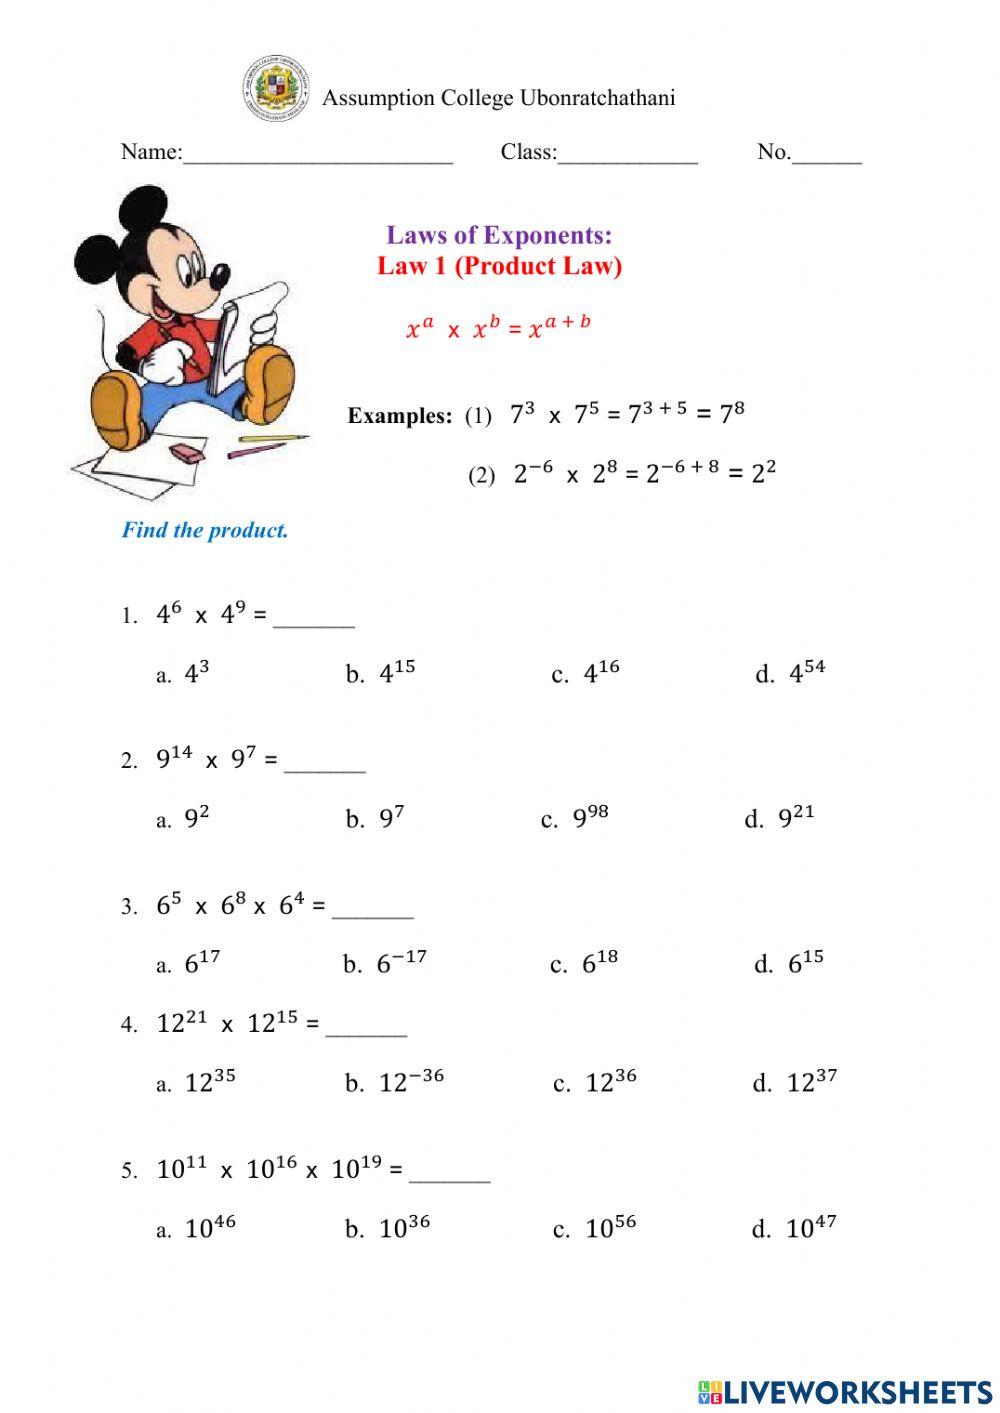 Product Rule (Laws of Exponents) worksheet